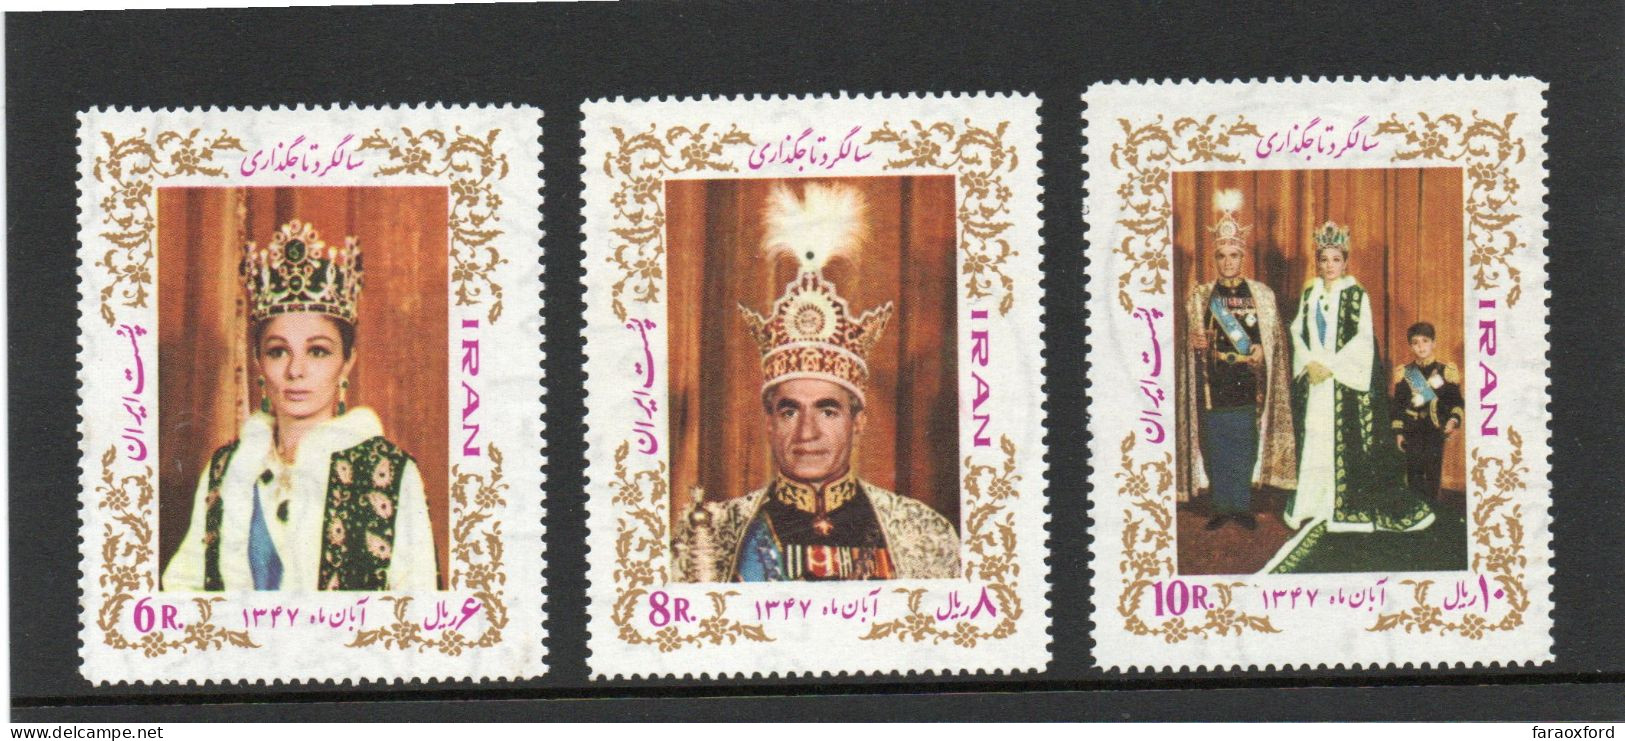 IRAN - ايران - PERSIA - 1968 - CORONATION - COMPLETE SET OF STAMPS - VERY GOOD MINT - Iran